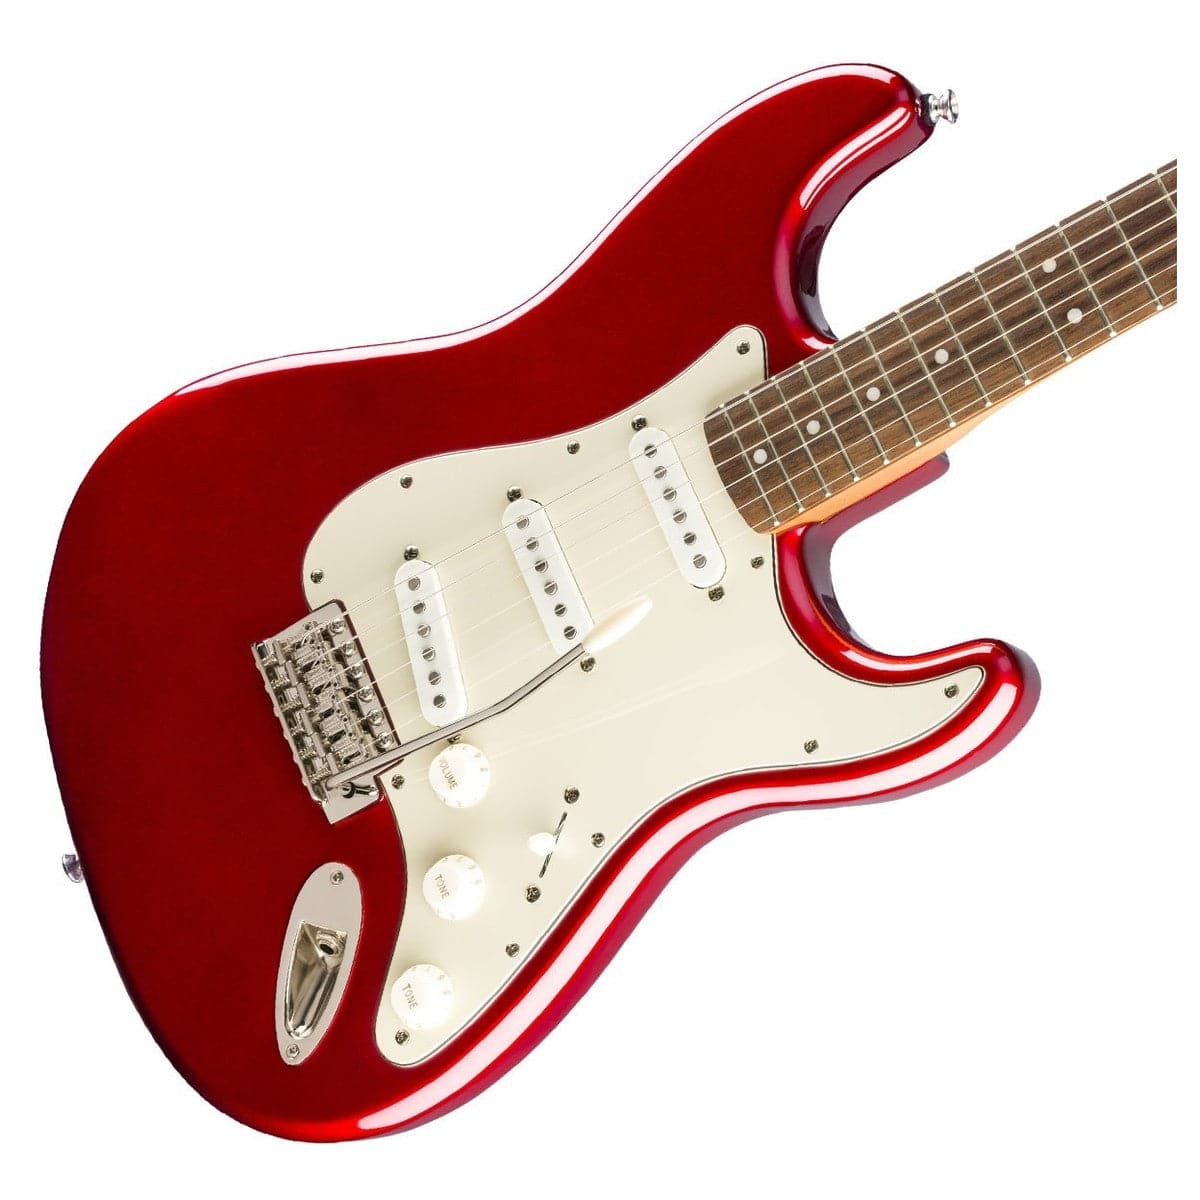 Squier Classic Vibe '60s Stratocaster - Candy Apple Red